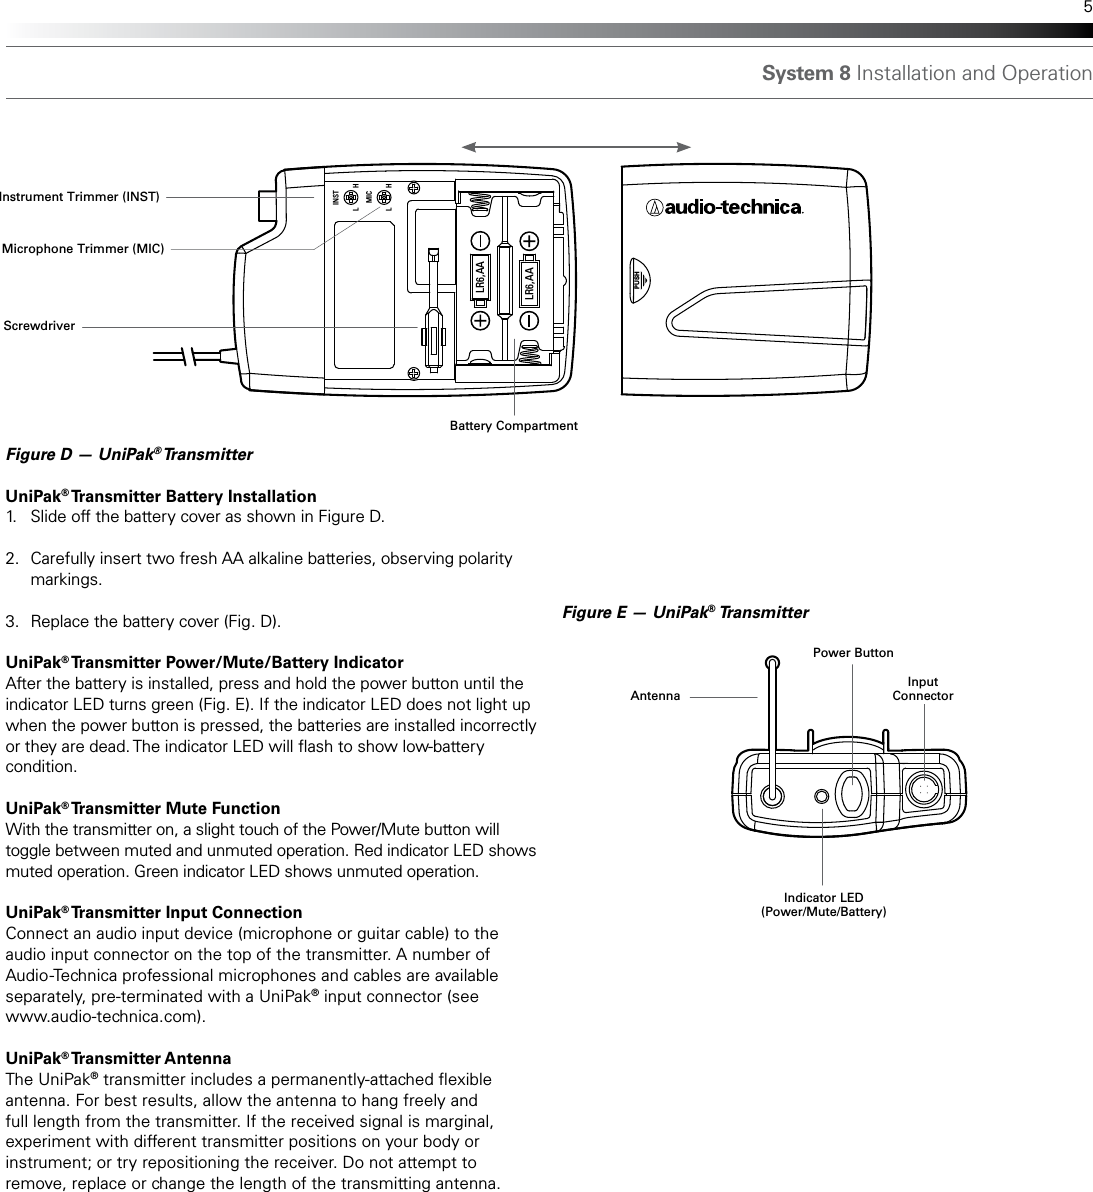 System 8 Installation and Operation 5Figure D — UniPak® Transmitter UniPak® Transmitter Battery Installation1.  Slide off the battery cover as shown in Figure D.2.  Carefully insert two fresh AA alkaline batteries, observing polarity   markings.3.  Replace the battery cover (Fig. D).UniPak® Transmitter Power/Mute/Battery IndicatorAfter the battery is installed, press and hold the power button until the indicator LED turns green (Fig. E). If the indicator LED does not light up when the power button is pressed, the batteries are installed incorrectly or they are dead. The indicator LED will ash to show low-battery condition. UniPak® Transmitter Mute FunctionWith the transmitter on, a slight touch of the Power/Mute button will toggle between muted and unmuted operation. Red indicator LED shows muted operation. Green indicator LED shows unmuted operation.UniPak® Transmitter Input ConnectionConnect an audio input device (microphone or guitar cable) to the audio input connector on the top of the transmitter. A number of Audio-Technica professional microphones and cables are available separately, pre-terminated with a UniPak® input connector (see www.audio-technica.com). UniPak® Transmitter AntennaThe UniPak® transmitter includes a permanently-attached exible antenna. For best results, allow the antenna to hang freely and full length from the transmitter. If the received signal is marginal, experiment with different transmitter positions on your body or instrument; or try repositioning the receiver. Do not attempt to remove, replace or change the length of the transmitting antenna.PUSHLINSTMICHL HLR6,AALR6,AAFigure E — UniPak® TransmitterAntennaInput ConnectorPower ButtonScrewdriverInstrument Trimmer (INST)Microphone Trimmer (MIC)Indicator LED(Power/Mute/Battery)Battery Compartment